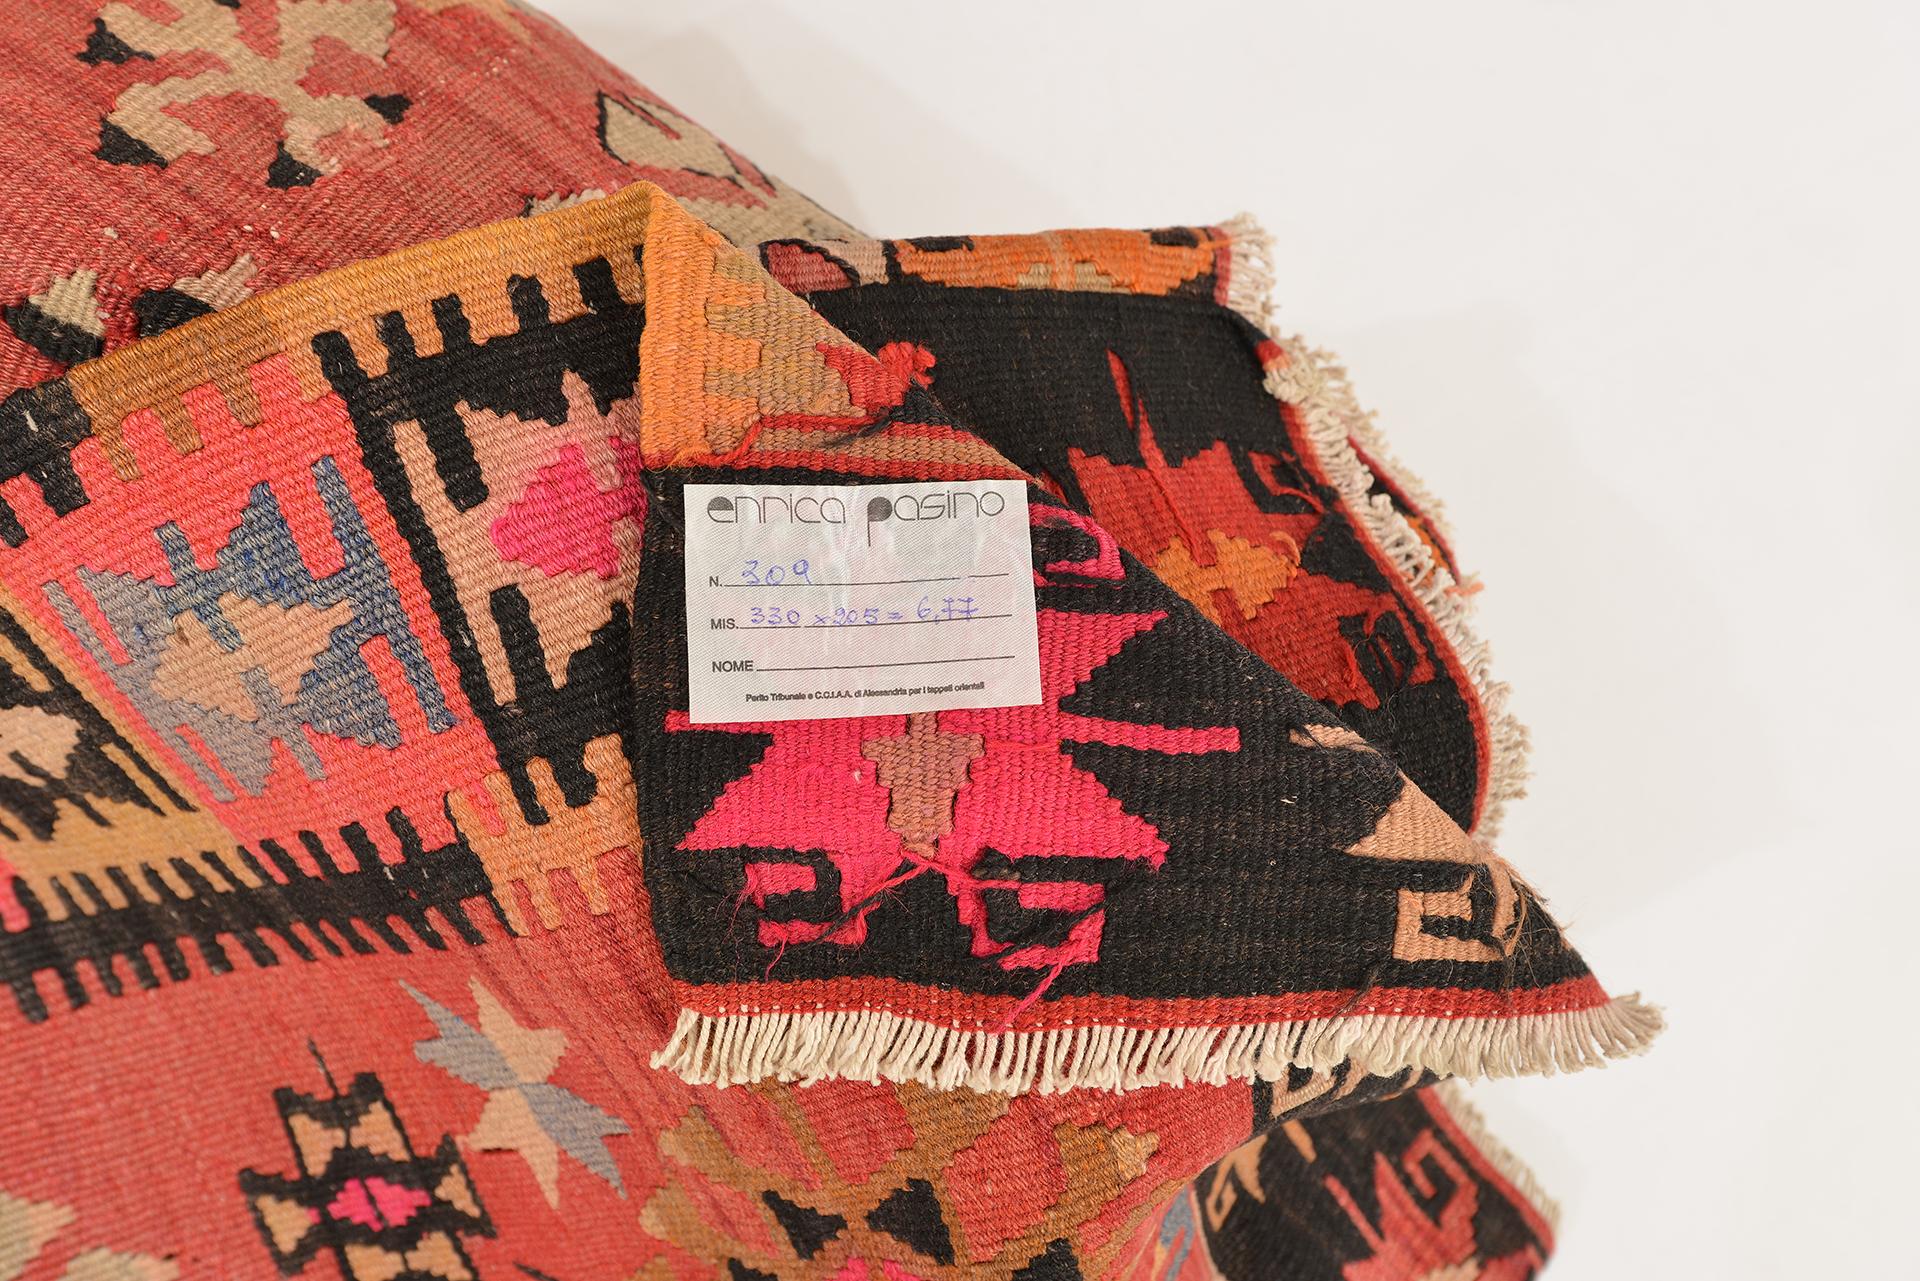 nr. 309 -  Large Turkish kilim, famous for quality and design, with a long weaving tradition.  Also sought after for its generous dimensions, suitable for modern living rooms.
Now with an interesting price because I want to close my activities.